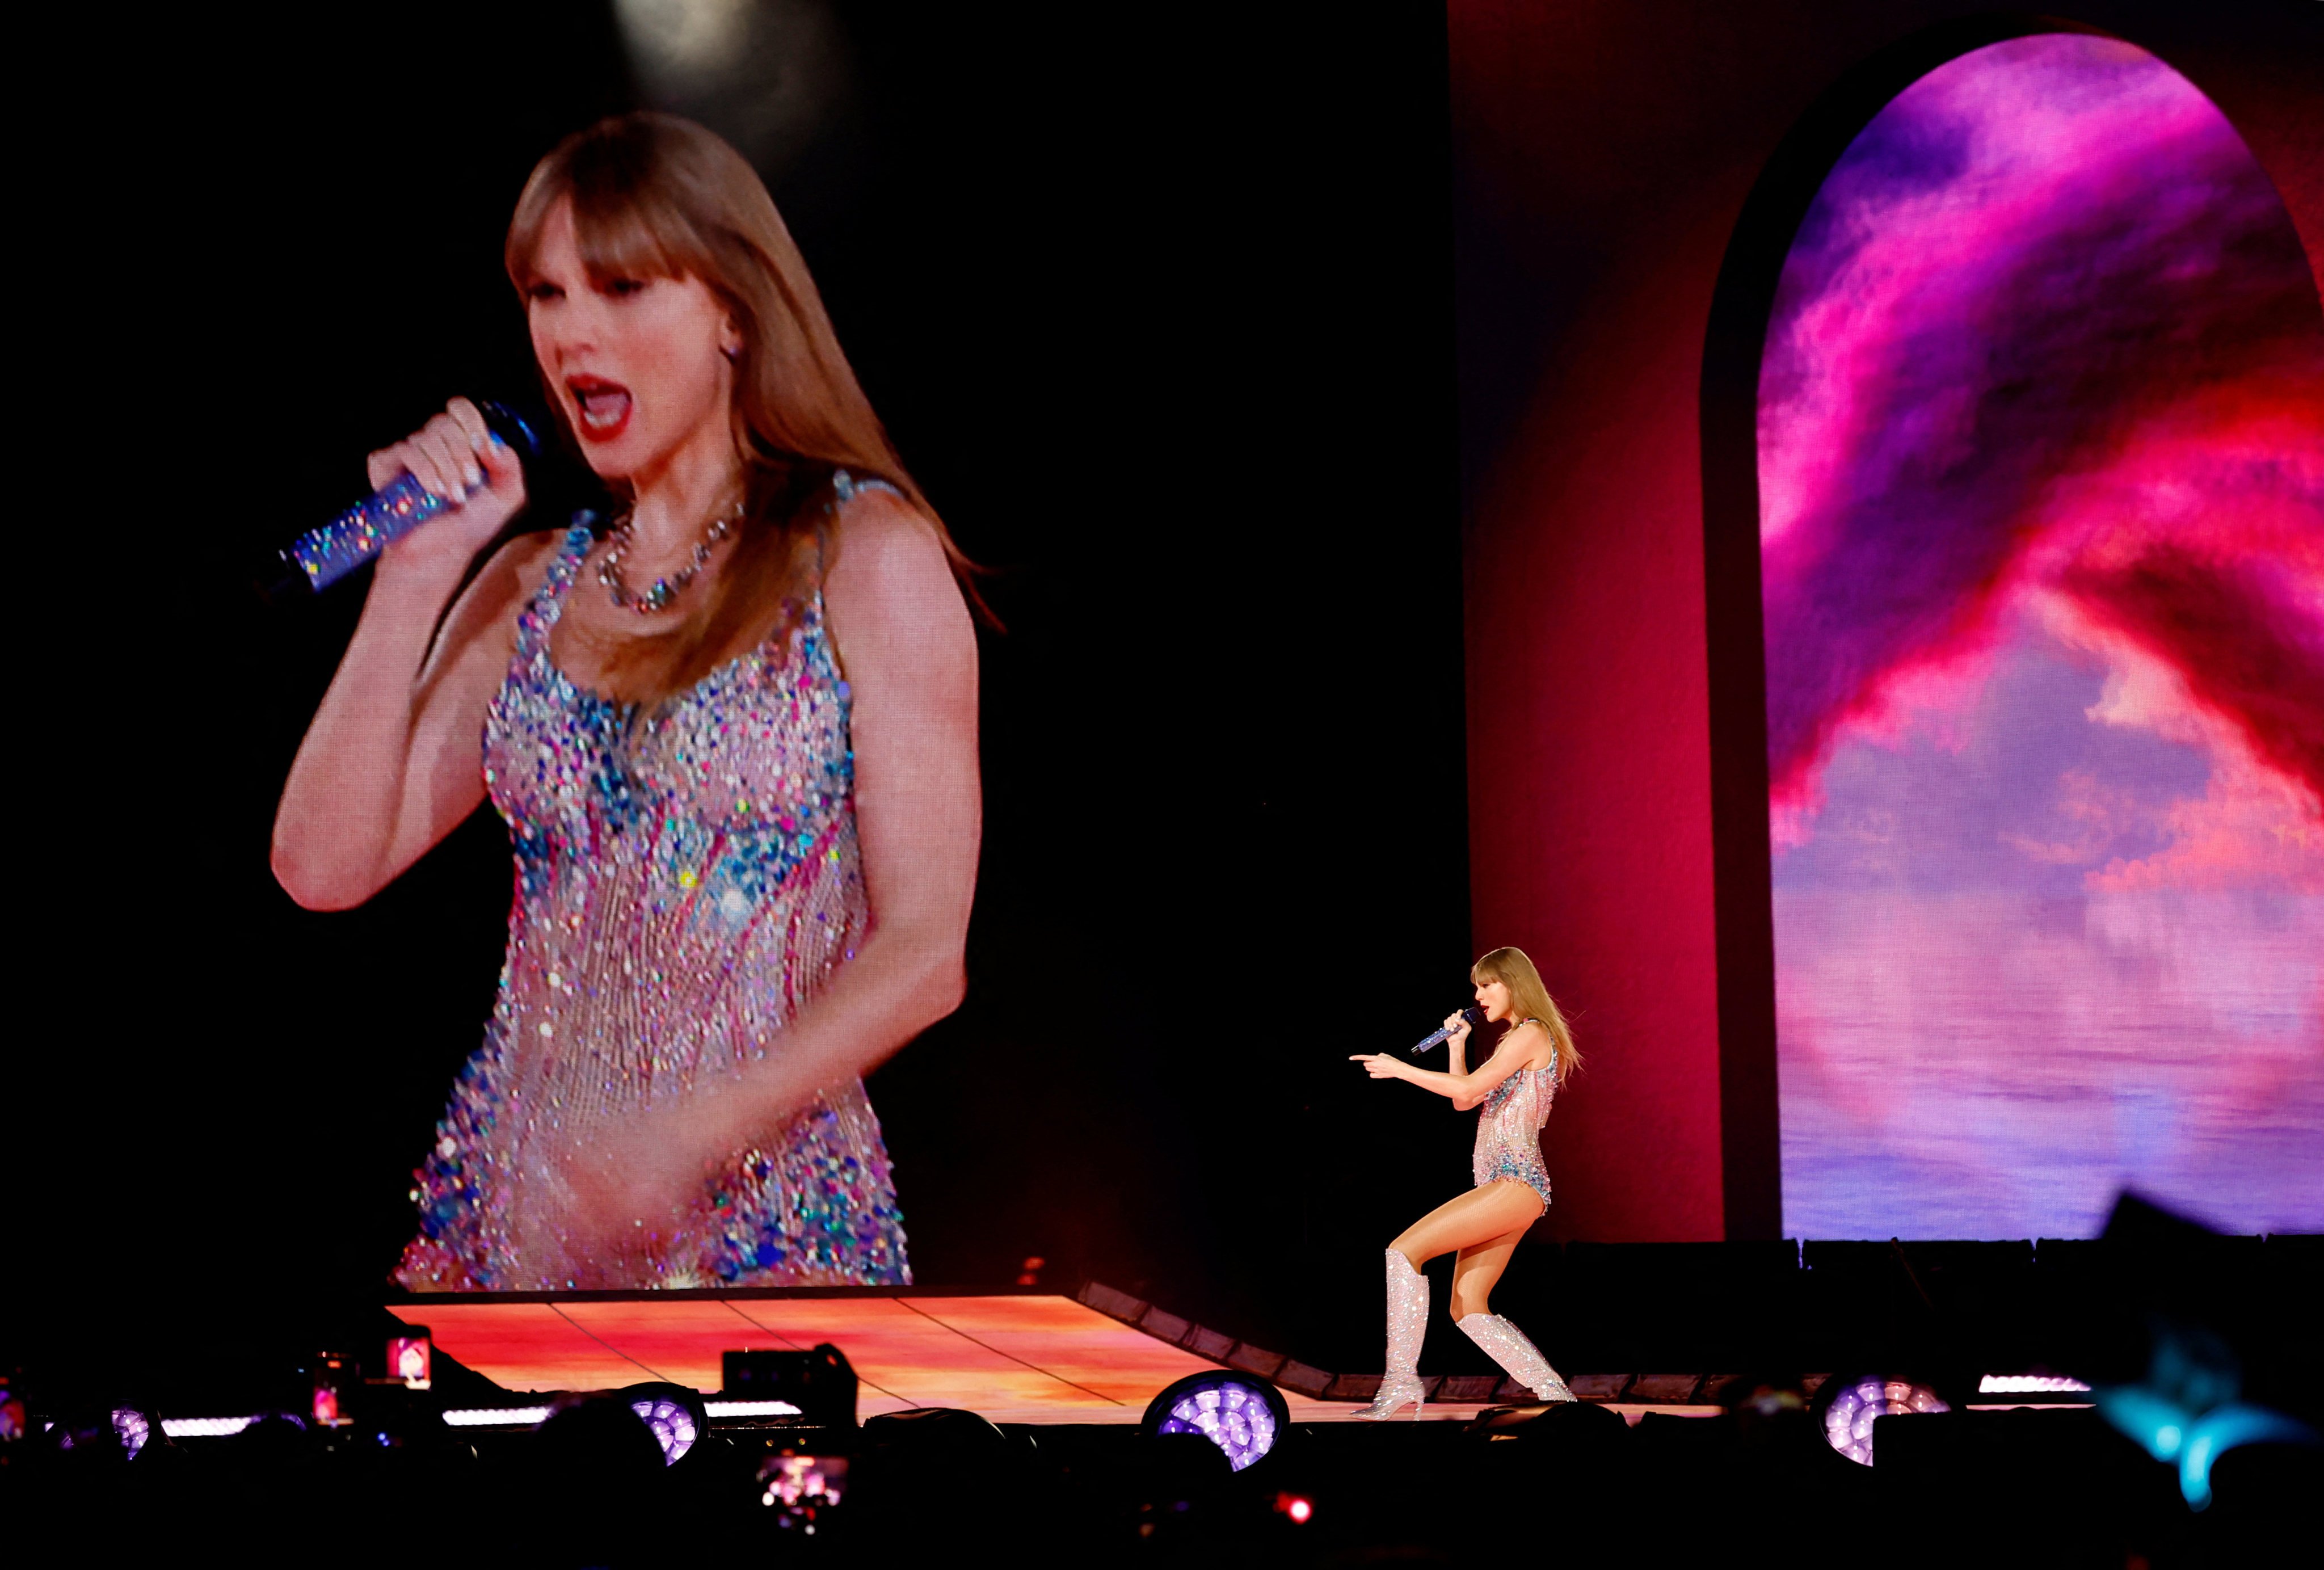 Singer Taylor Swift performs at her concert for the international “The Eras Tour” in Tokyo on February 7. Photo: Reuters